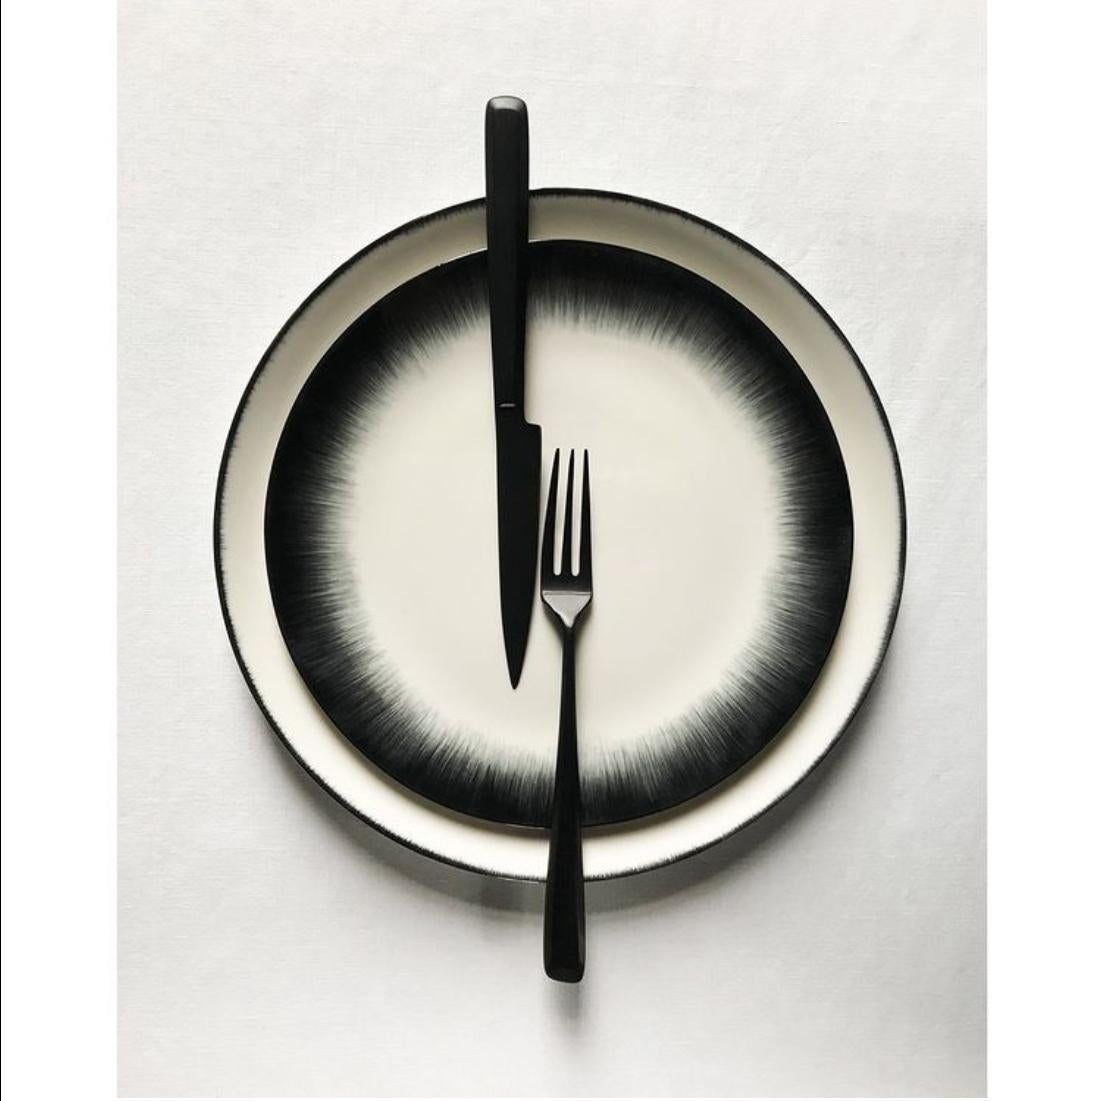 Ann Demeulemeester for Serax 28 cm plates (set of two) In New Condition For Sale In Laguna Beach, CA